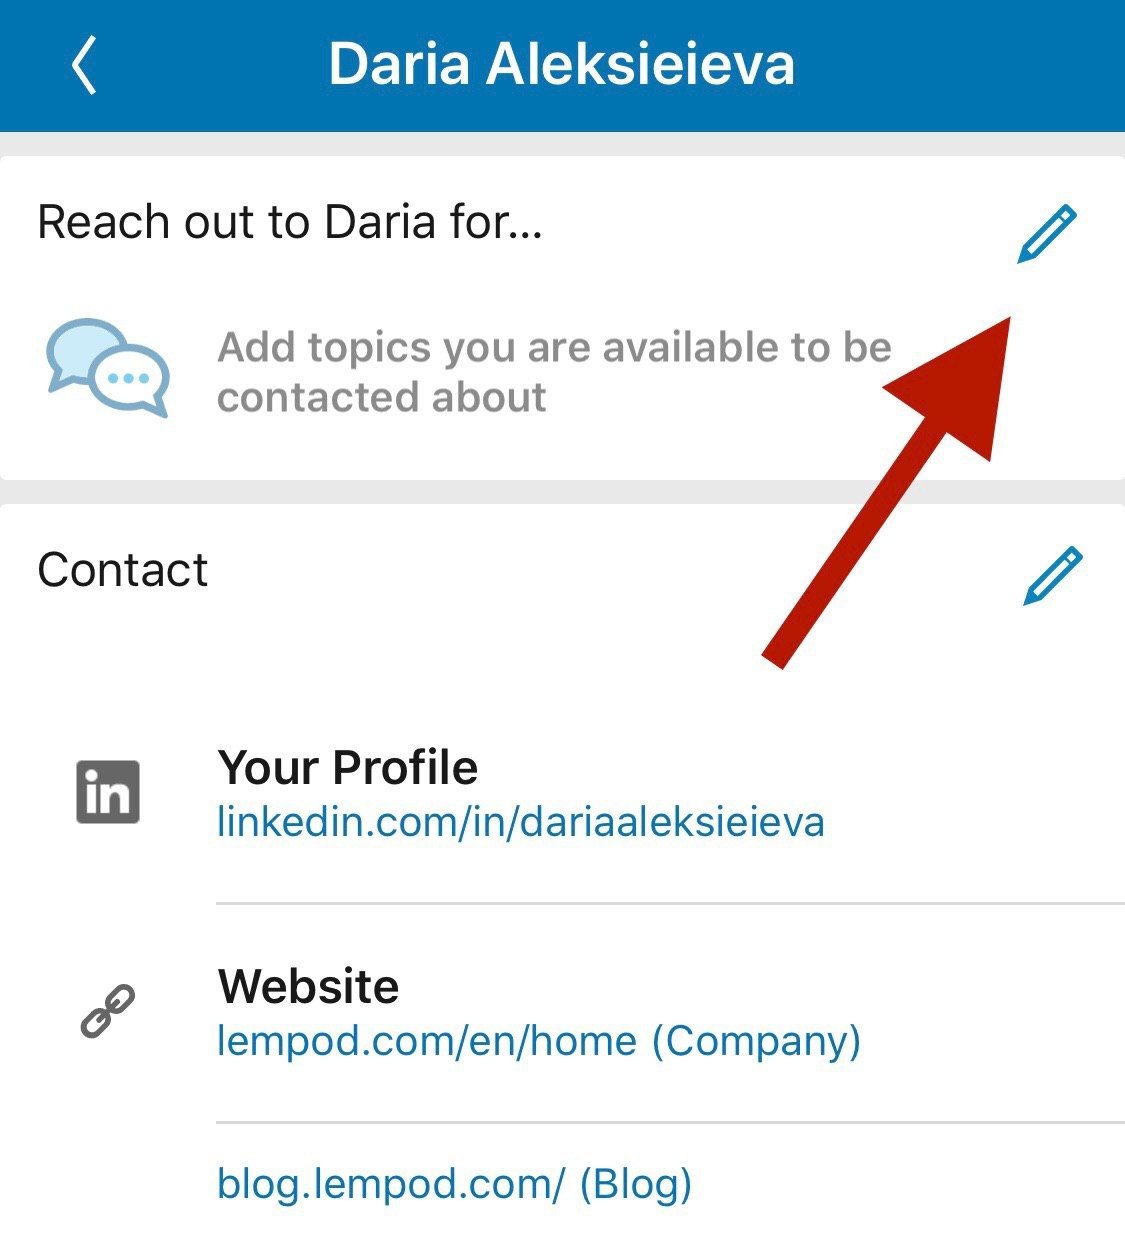 11 Powerful LinkedIn Features You Didn't Know About